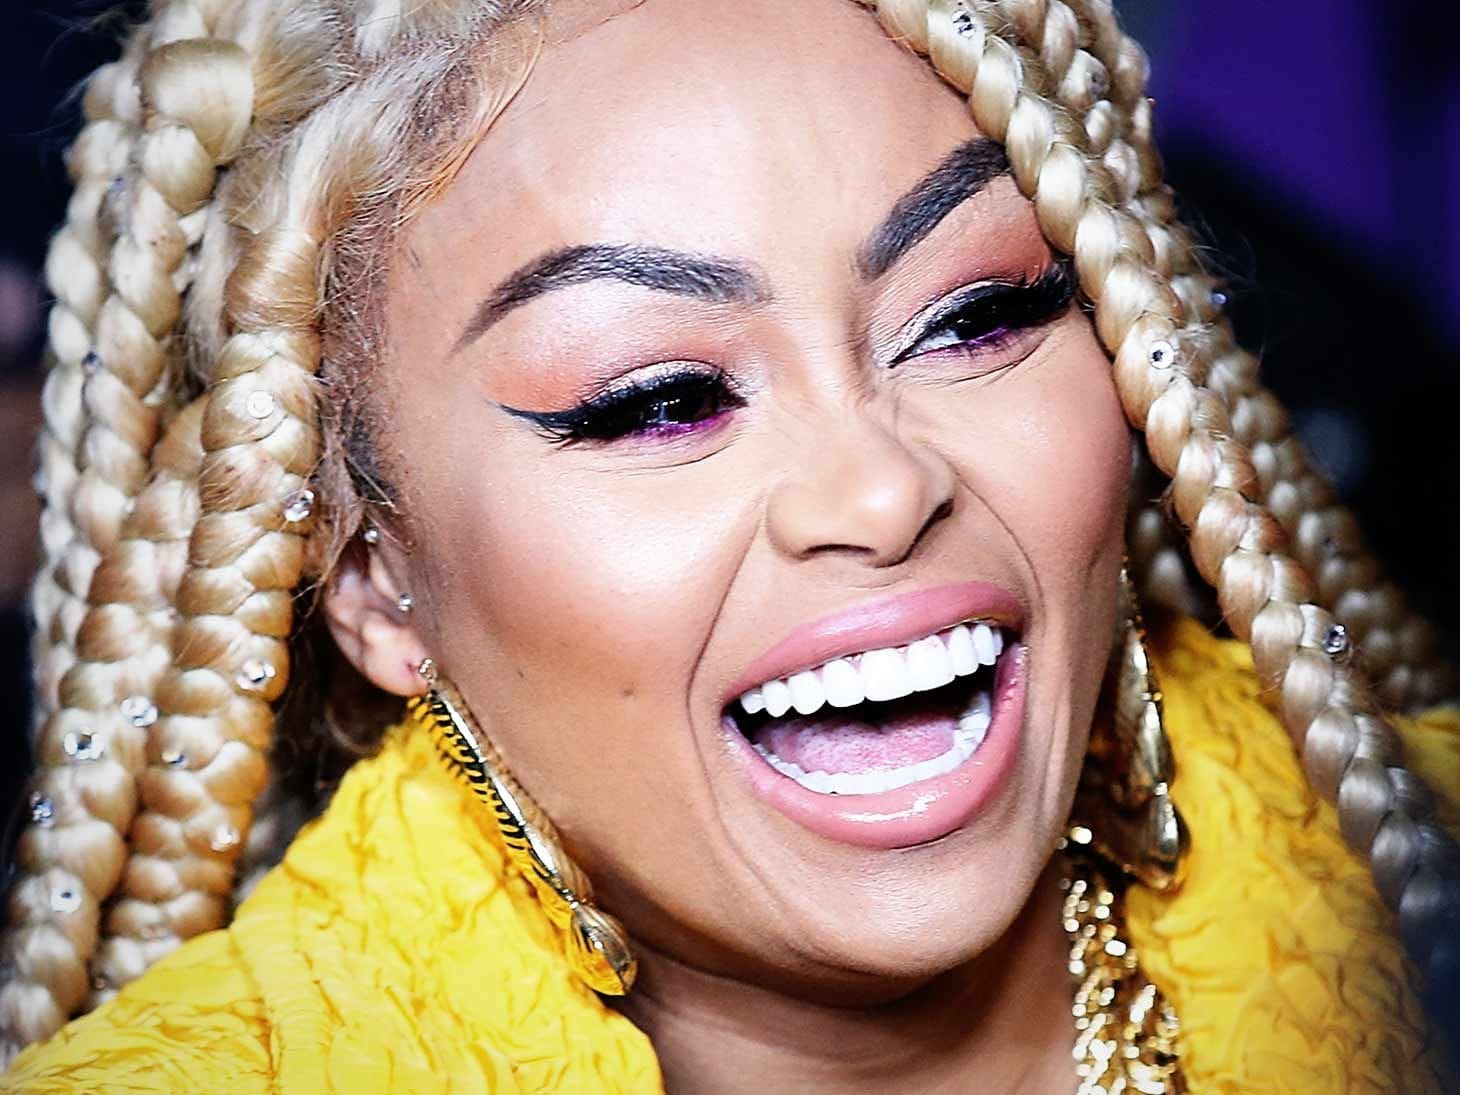 Blac Chyna Has An Exciting Announcement For Her Fans